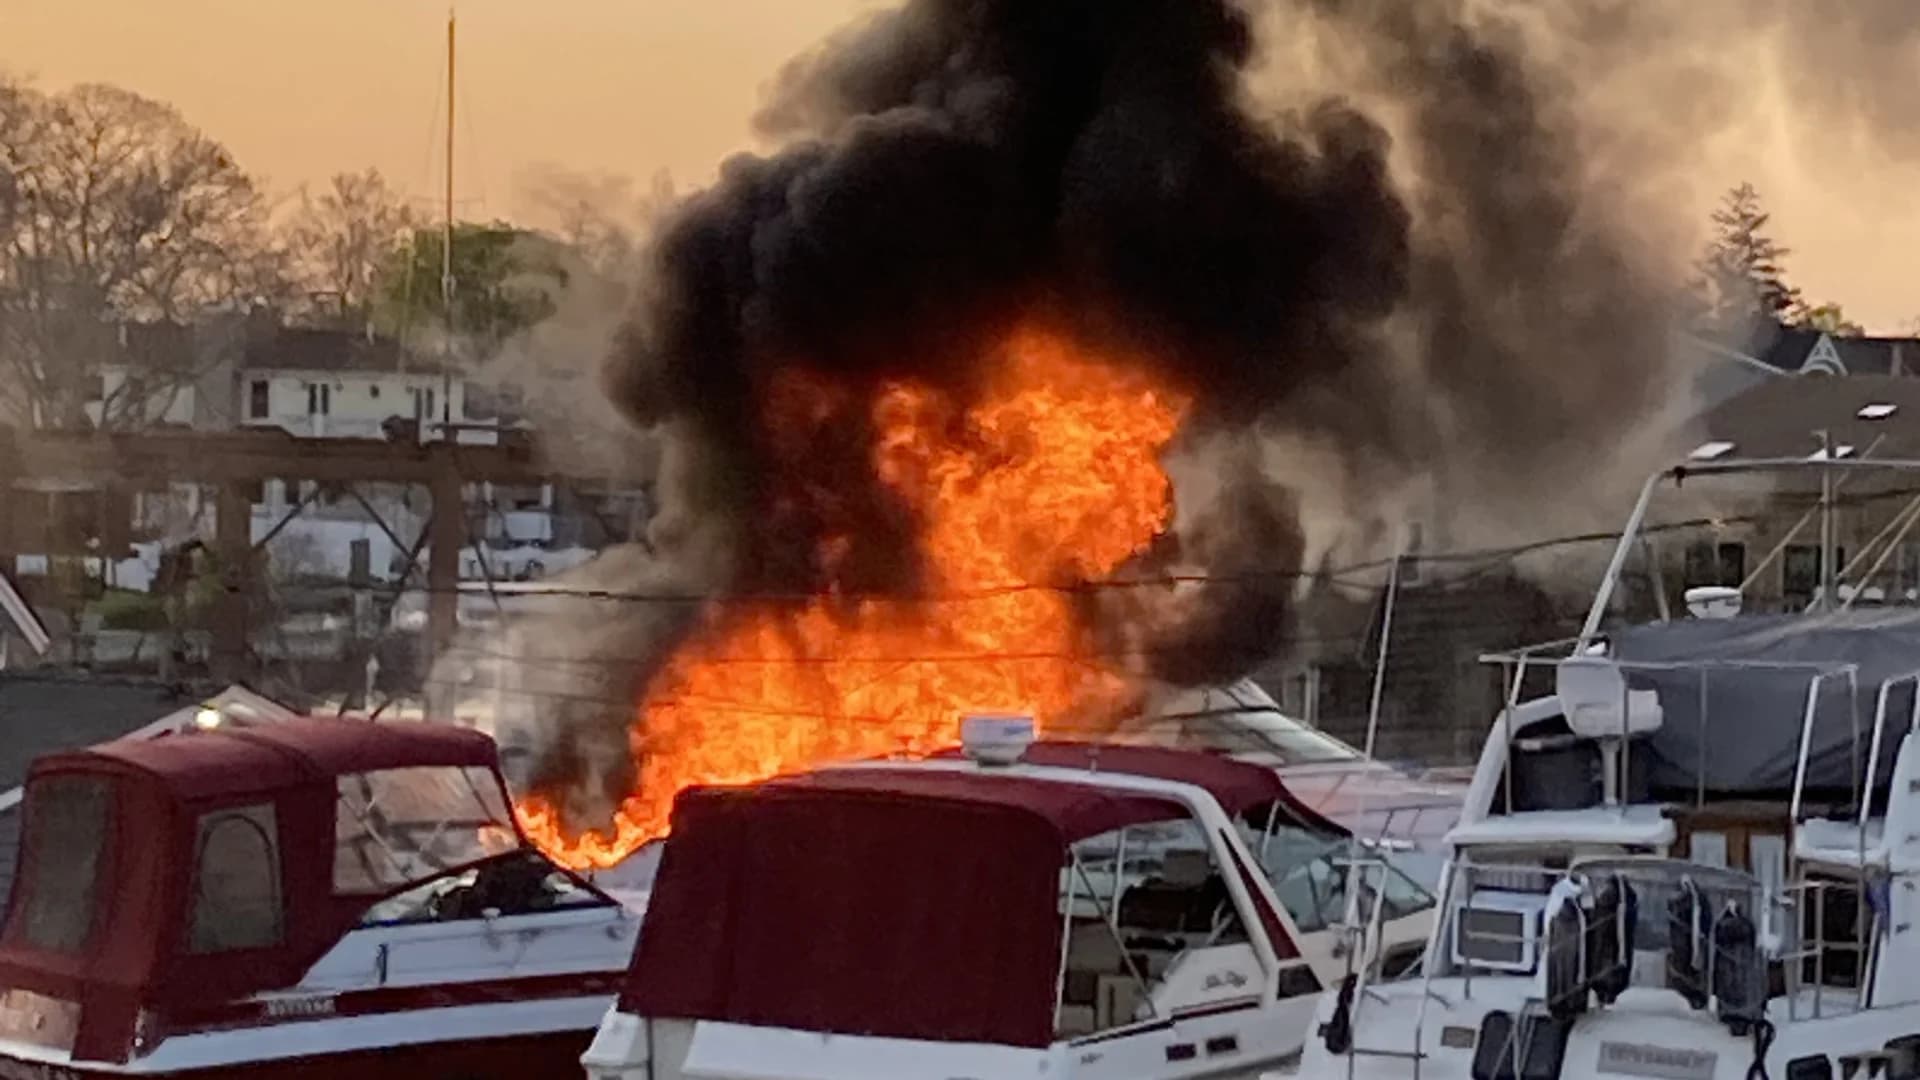 PHOTOS: Crews respond to boat fire in Amityville